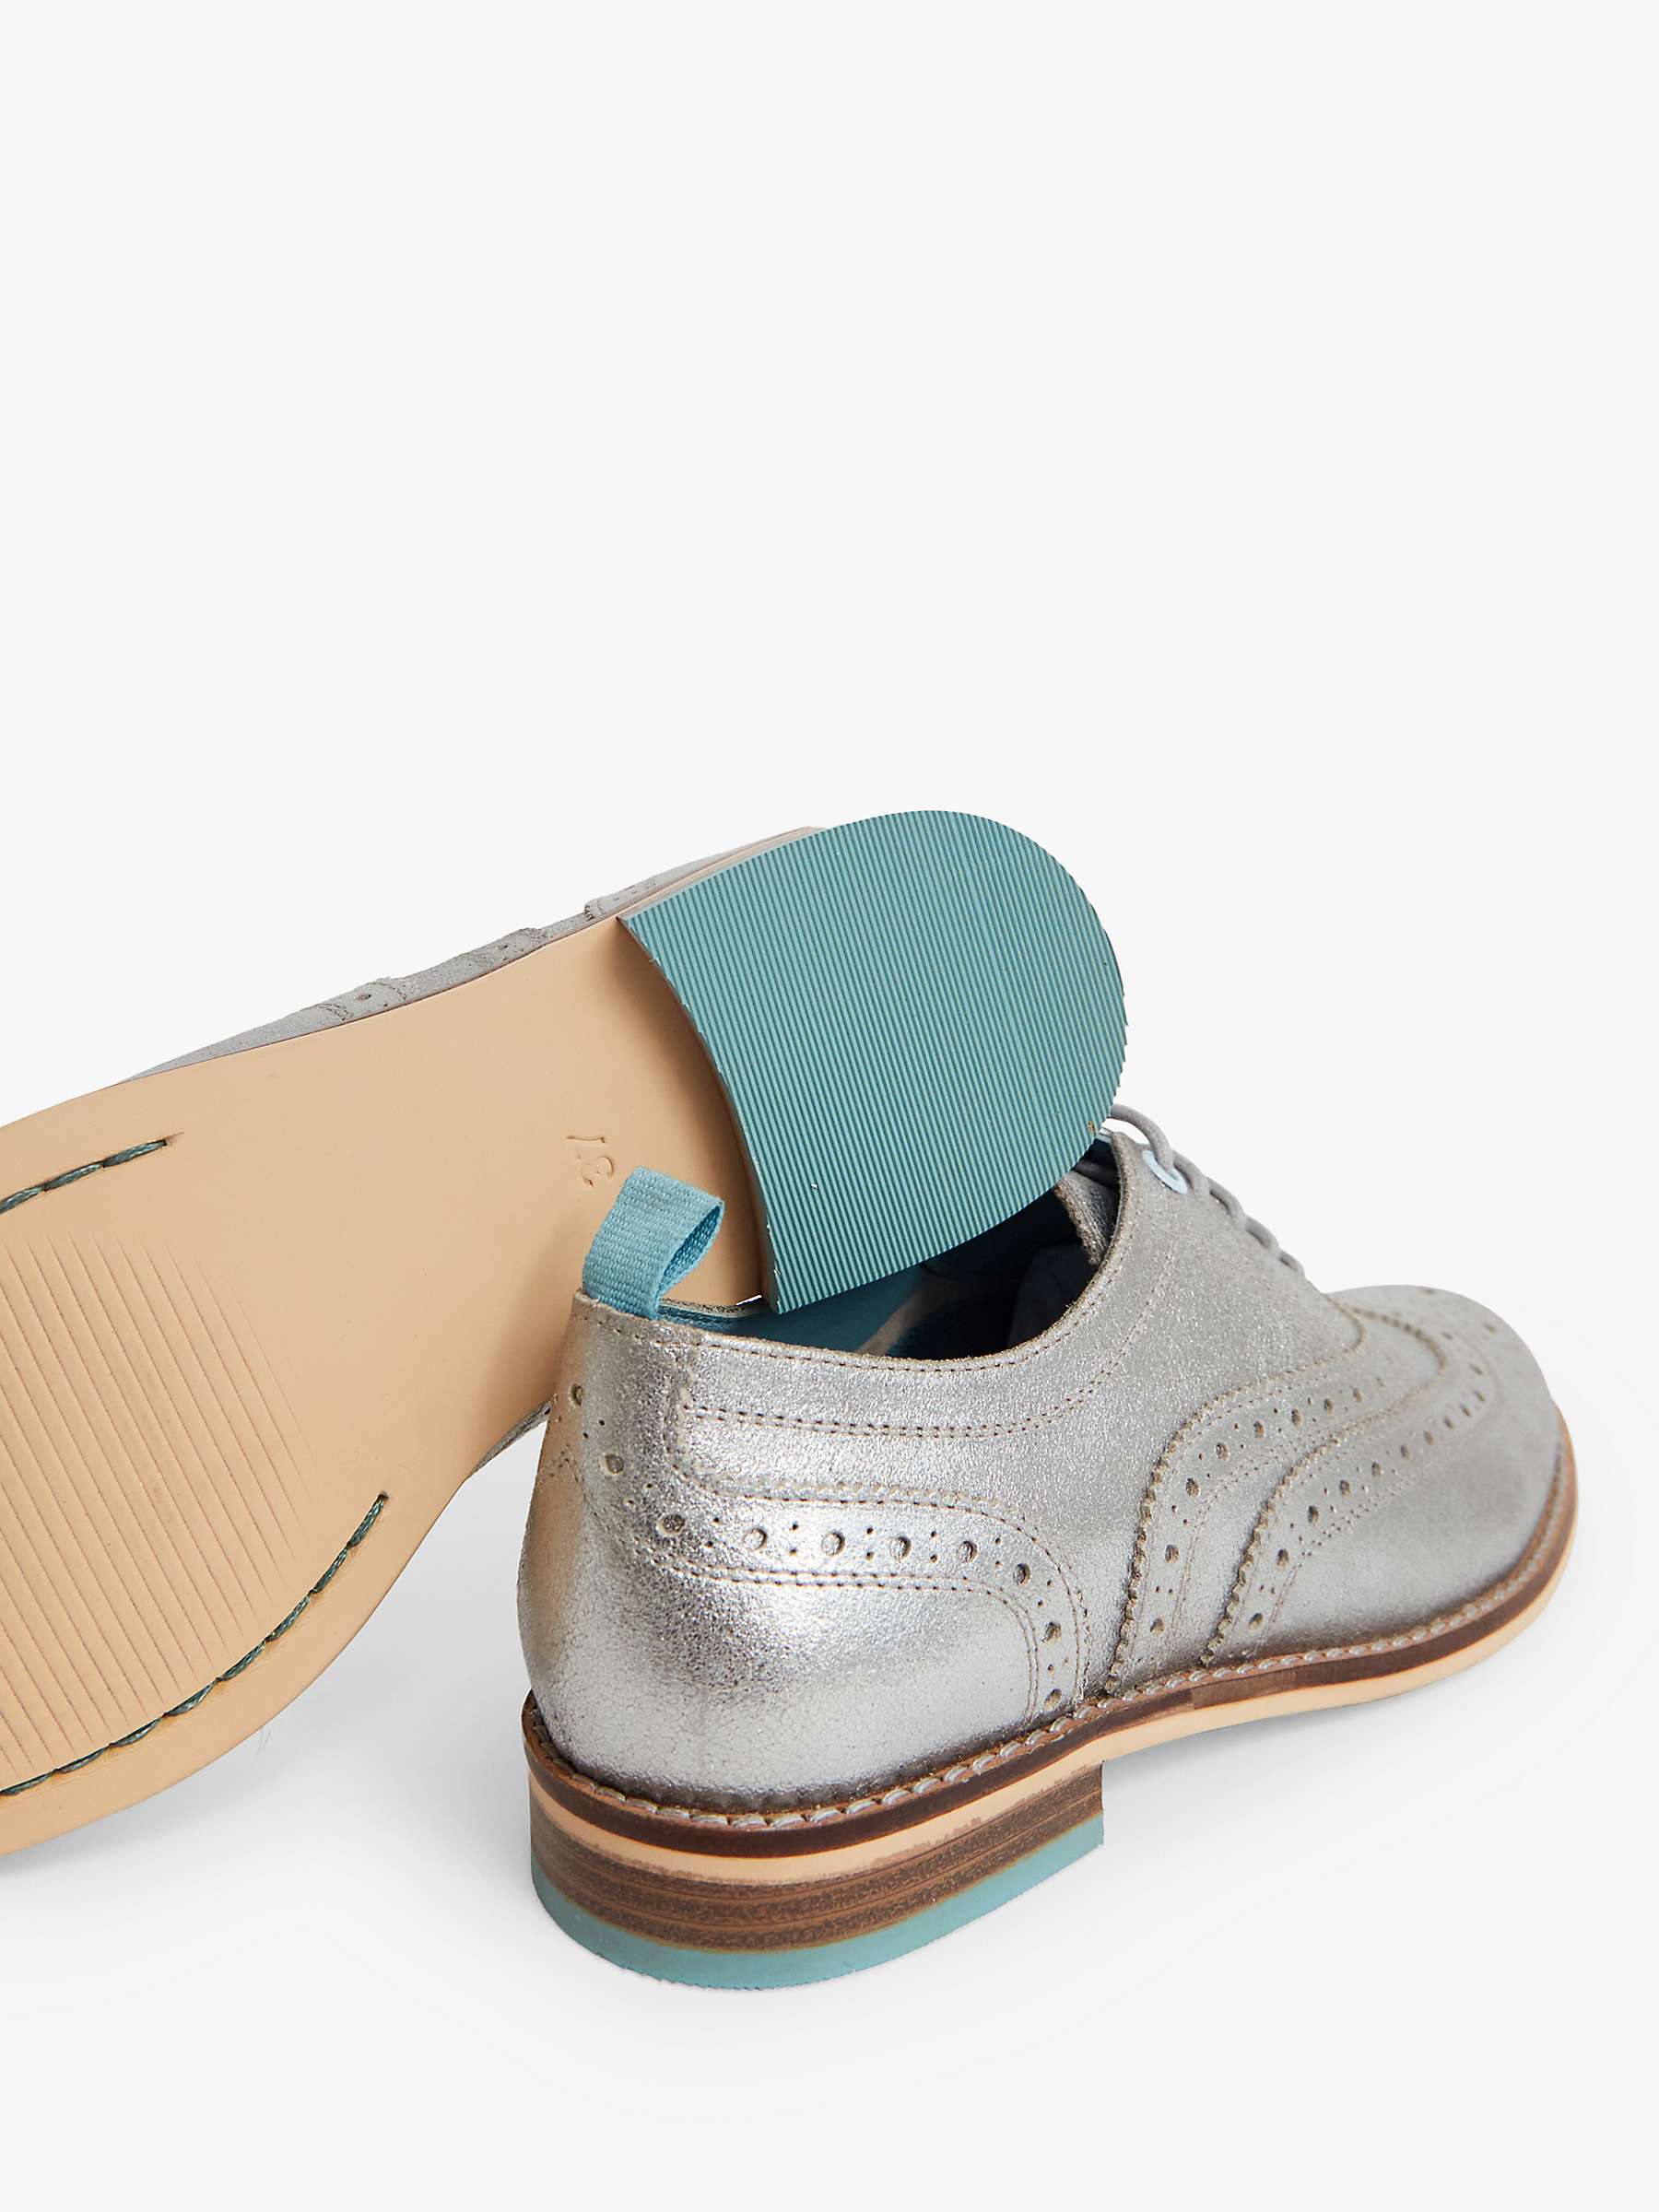 Buy White Stuff Thistle Leather Brogues Online at johnlewis.com